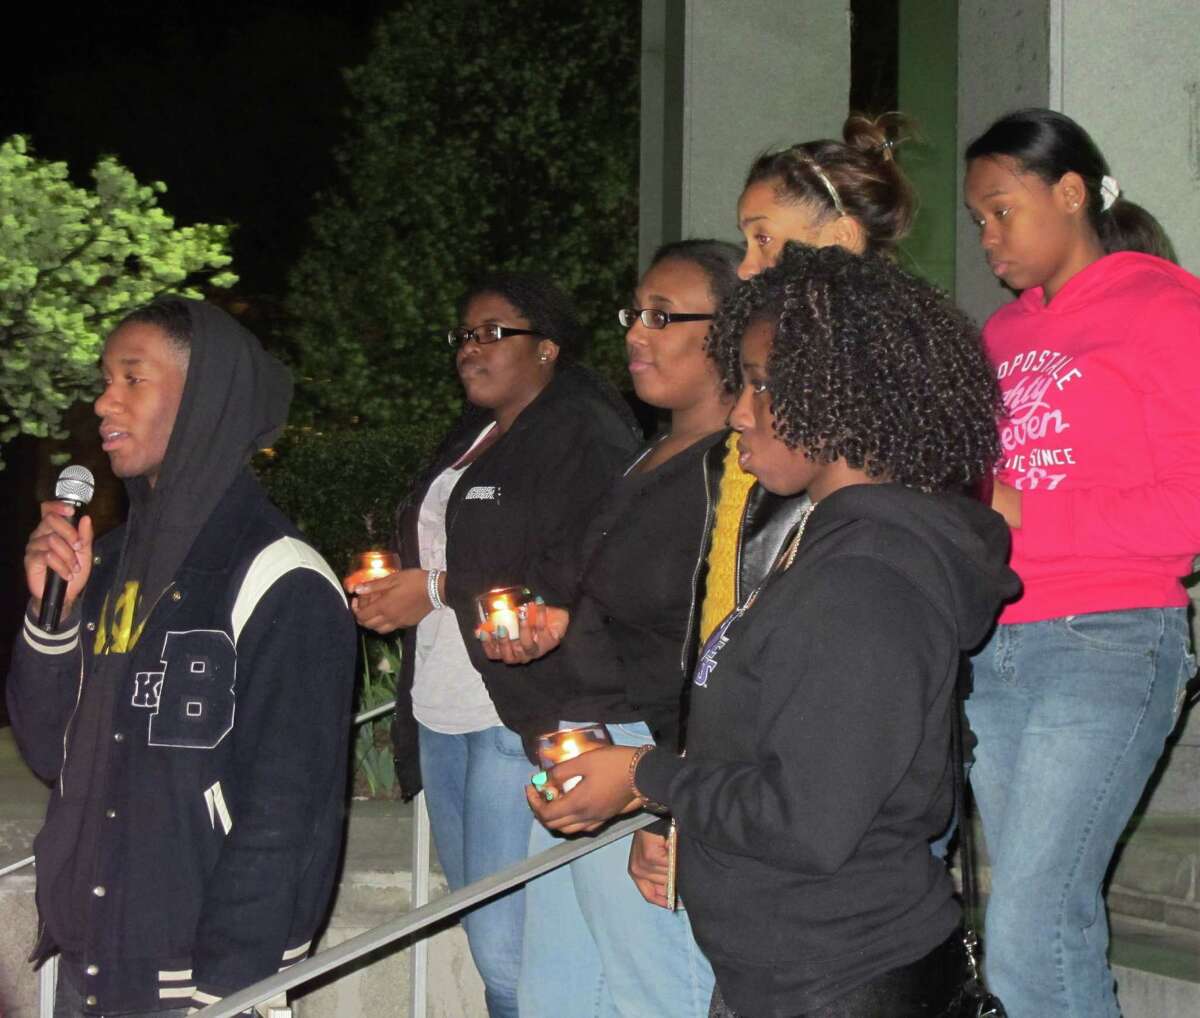 Chris Soufron, of the Alpha Phi Alpha fraternity at the University of Bridgeport, speaks at a rally for justice in the Trayvon Martin case on Wednesday, April 11, 2012.